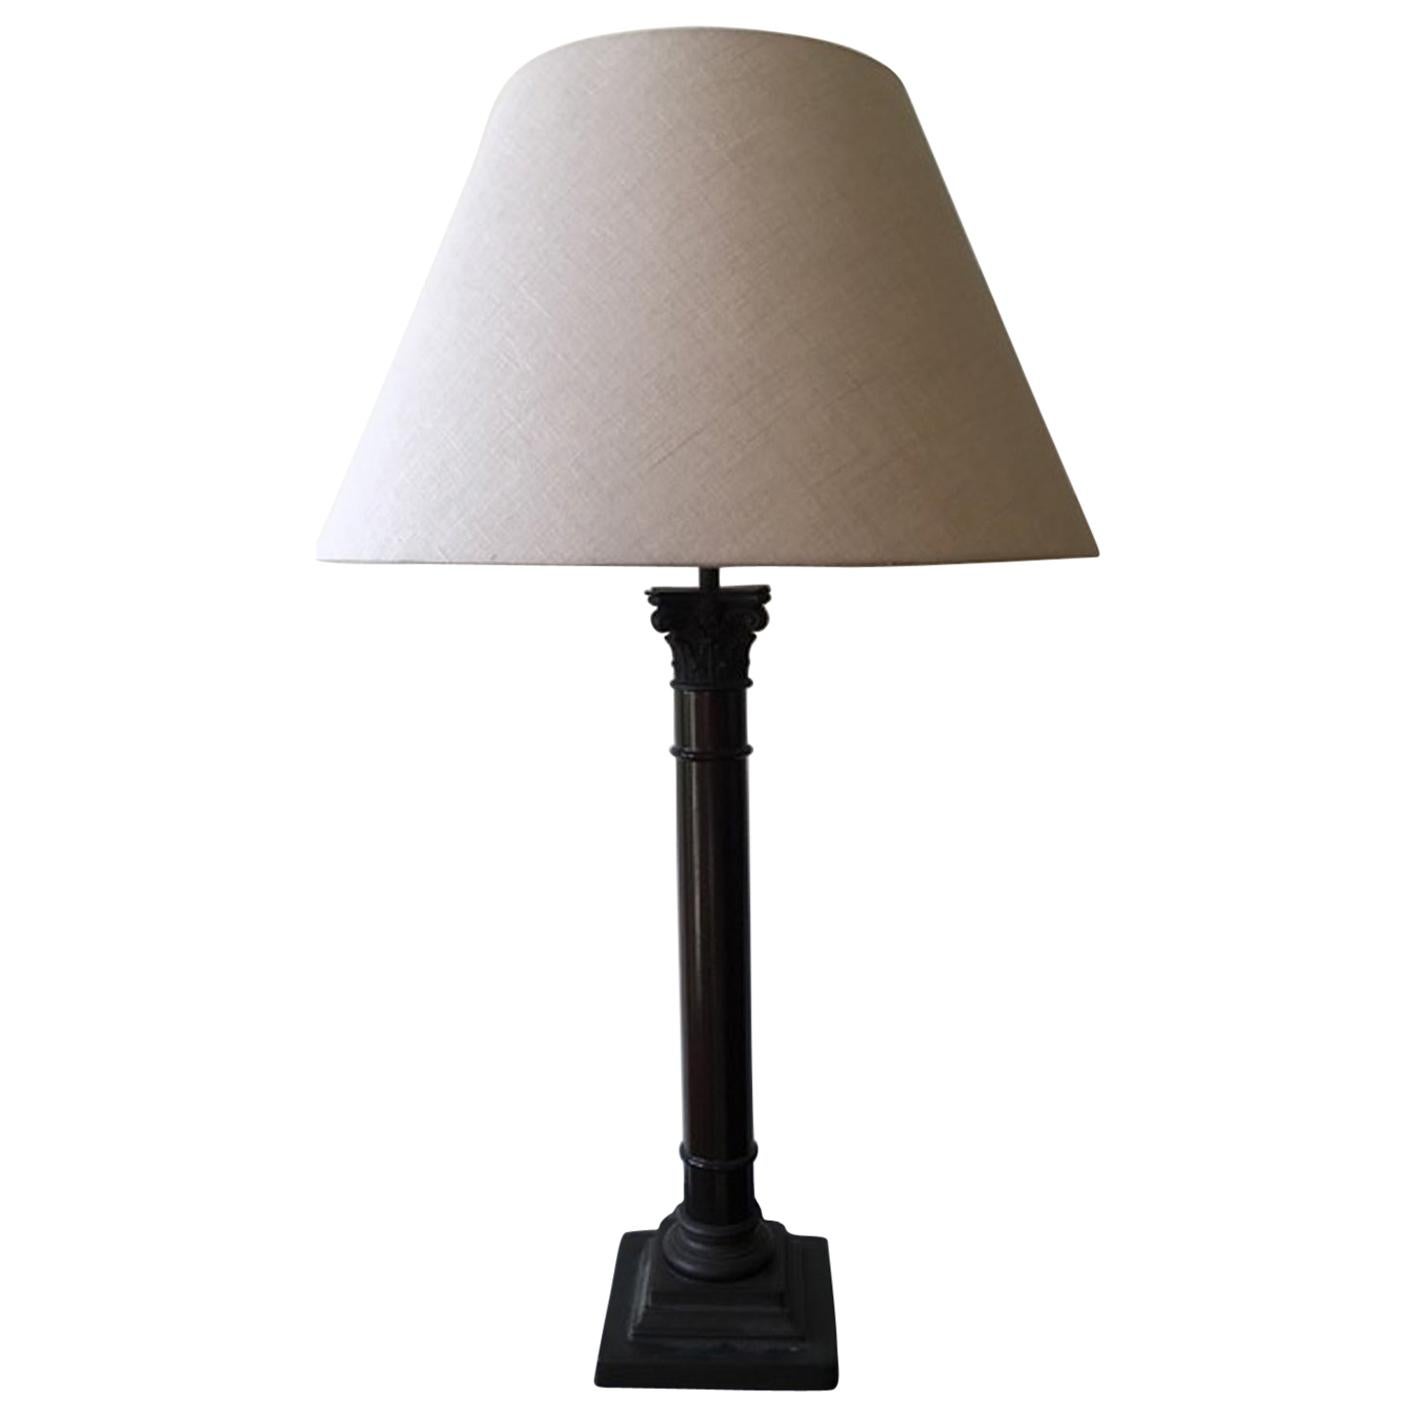 Columned Table Lamp with Natural Lampshade Made in Italy